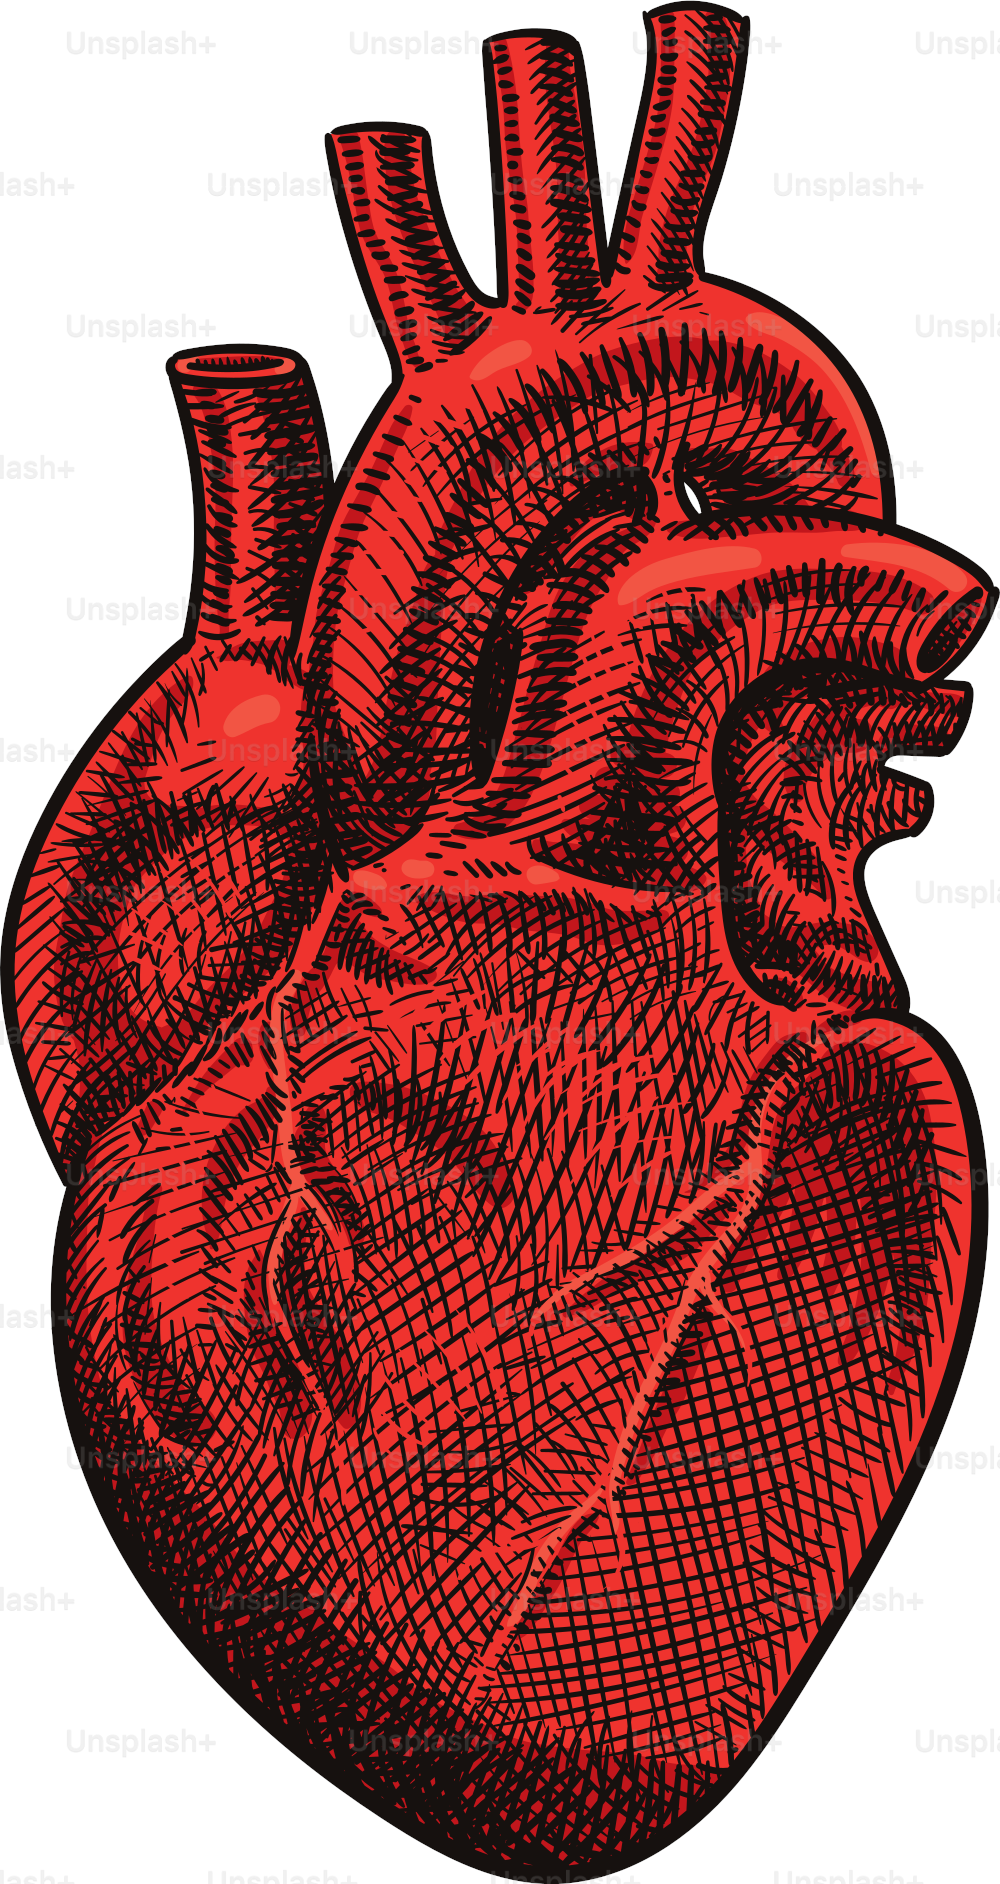 Colored drawing of a heart